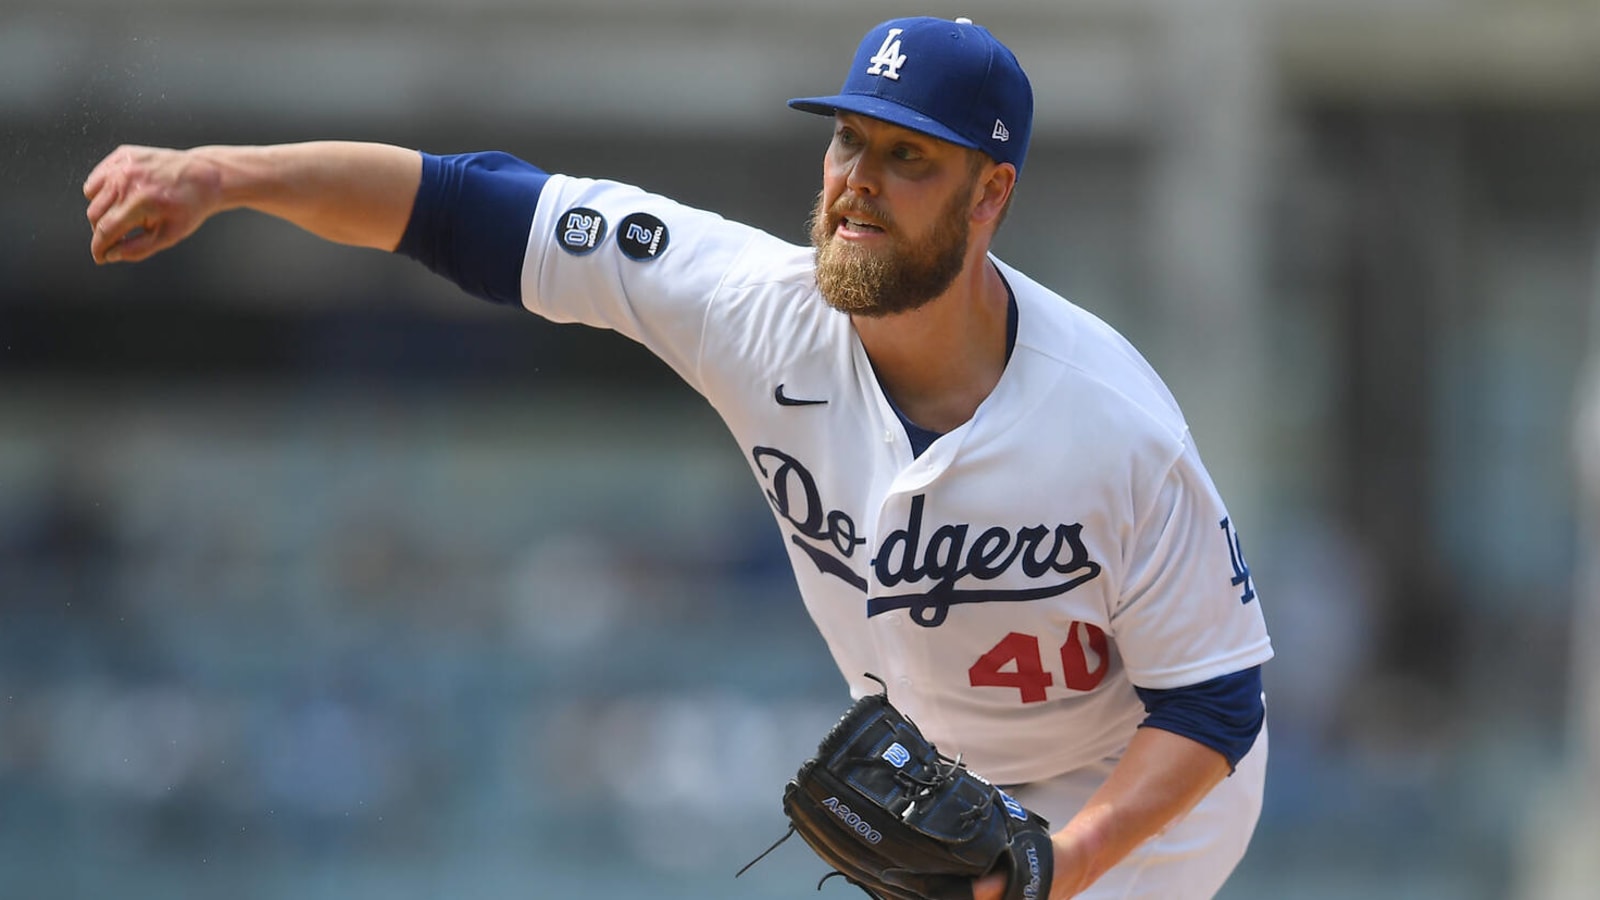 Dodgers re-sign veteran RHP to one-year deal